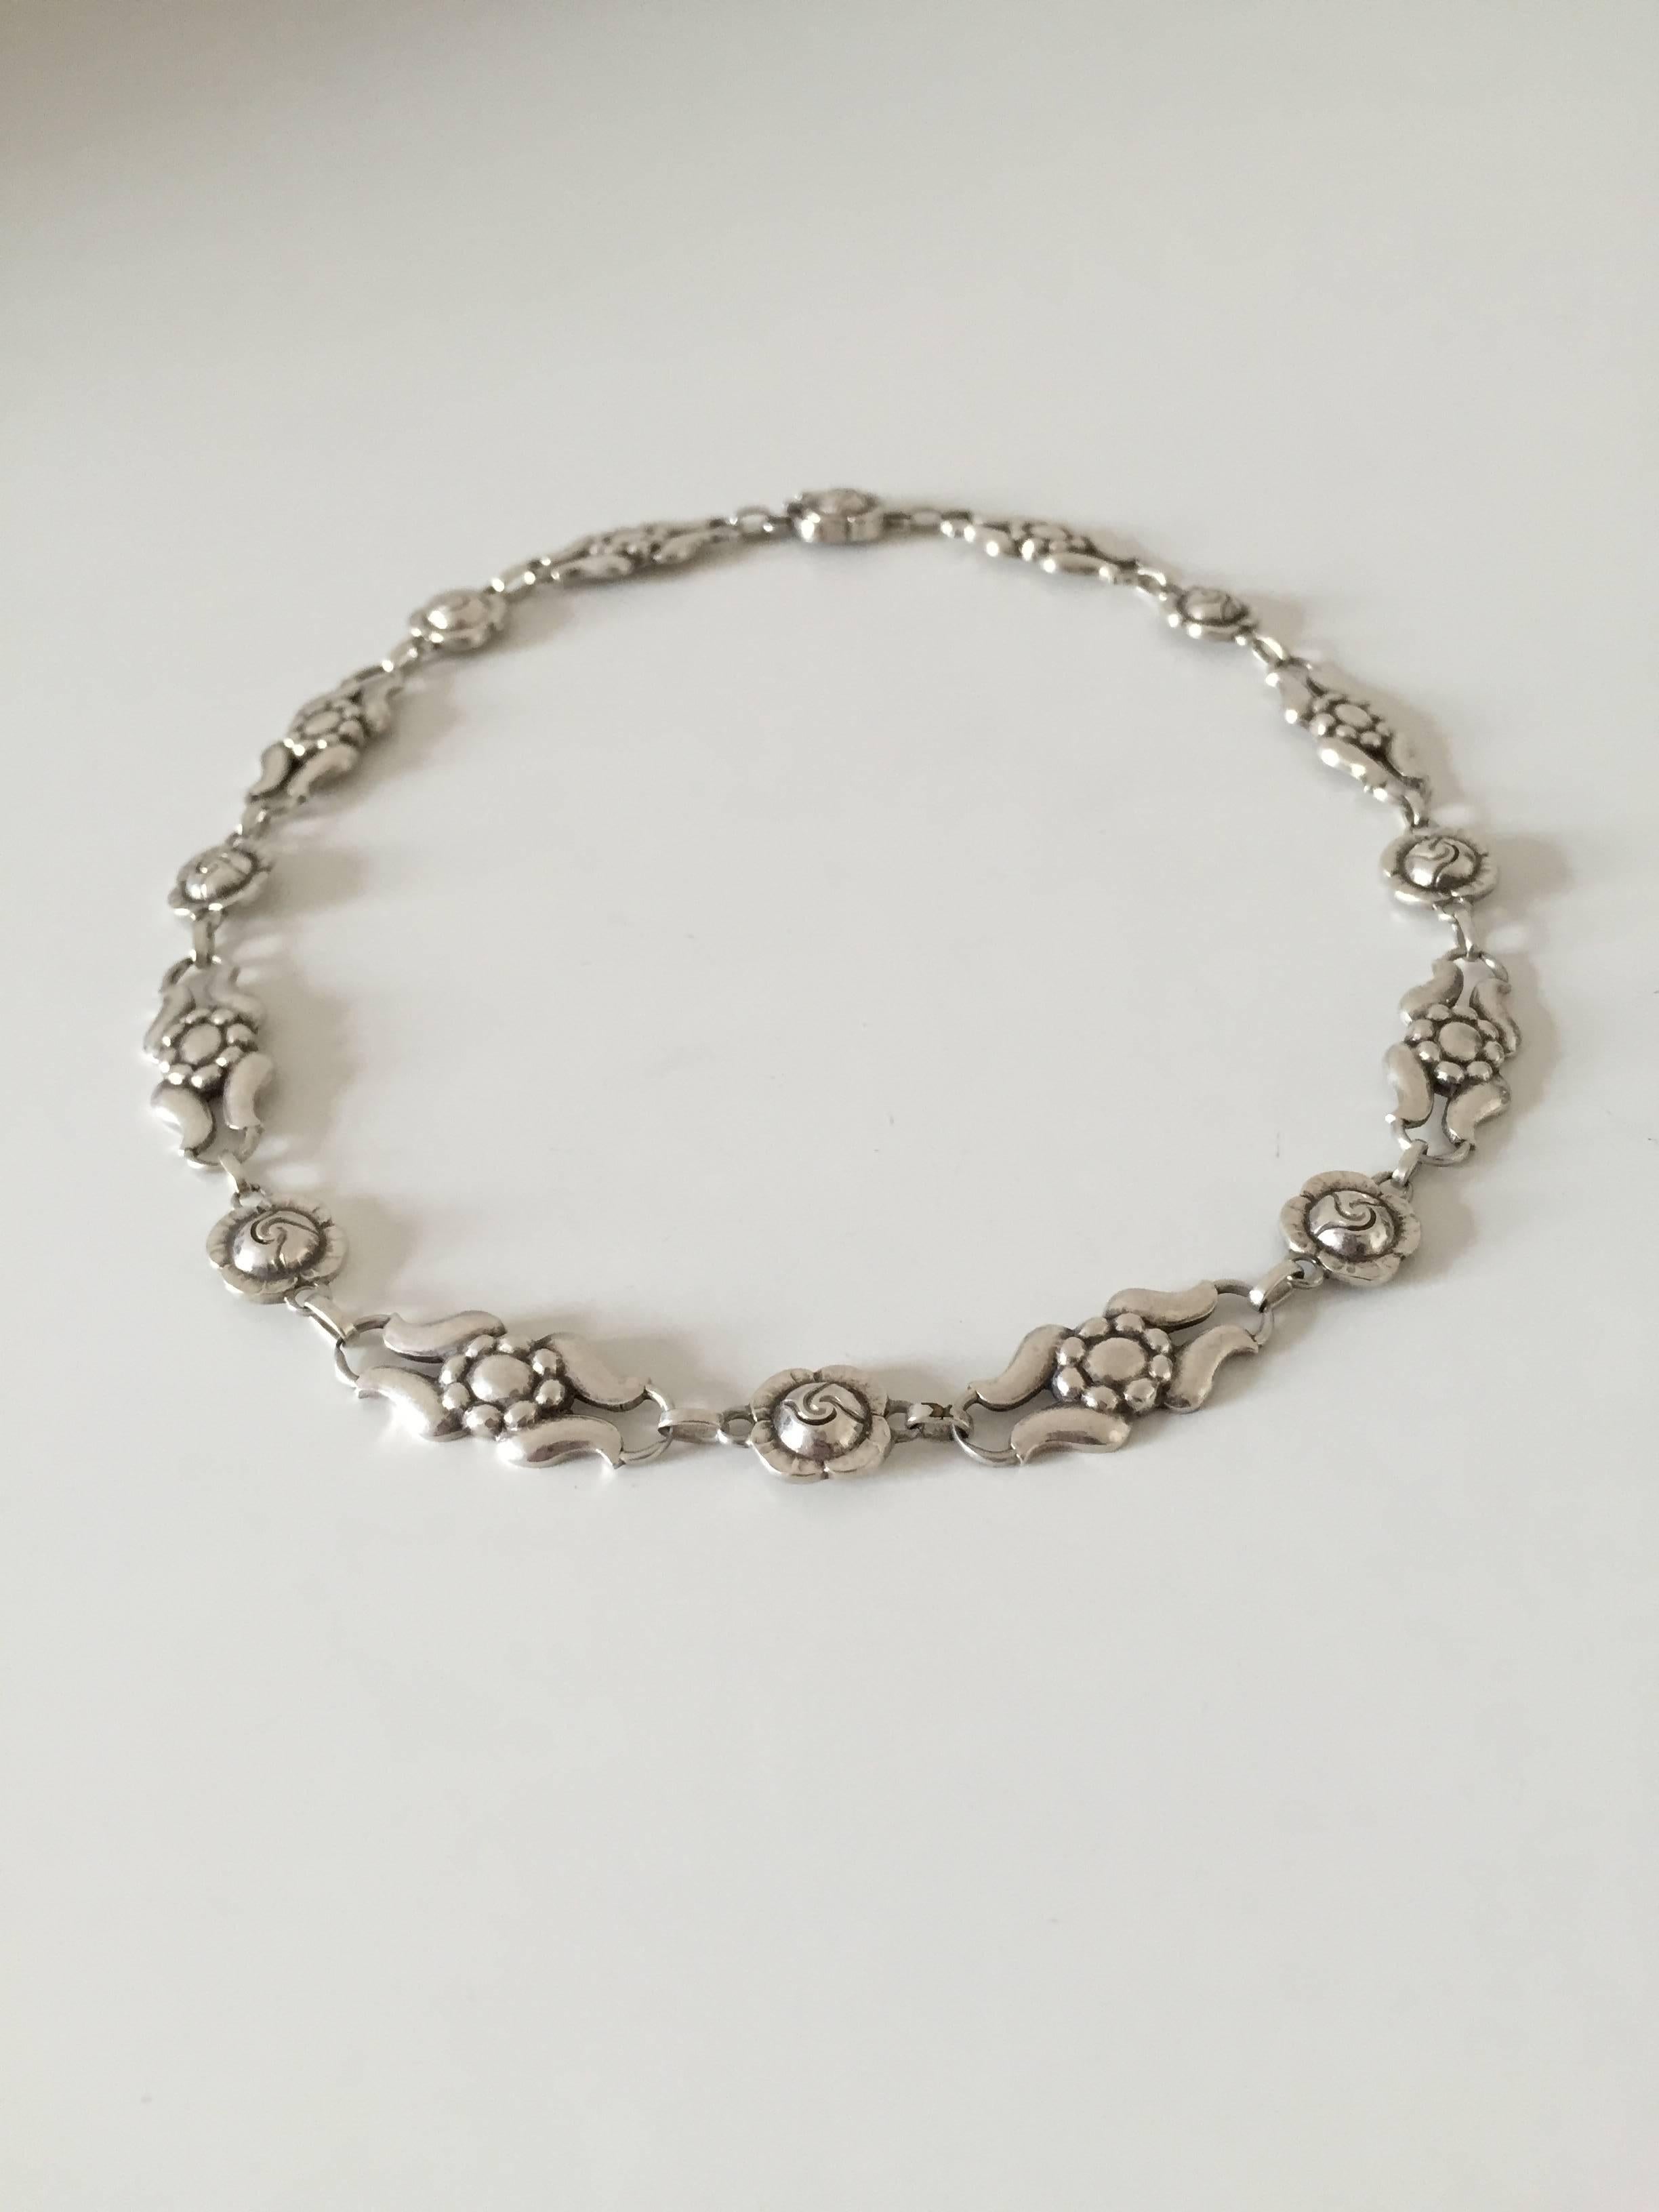 Georg Jensen sterling silver necklace. The necklace has older marks and is in a good condition. It measures 45.4 cm (17 7/8